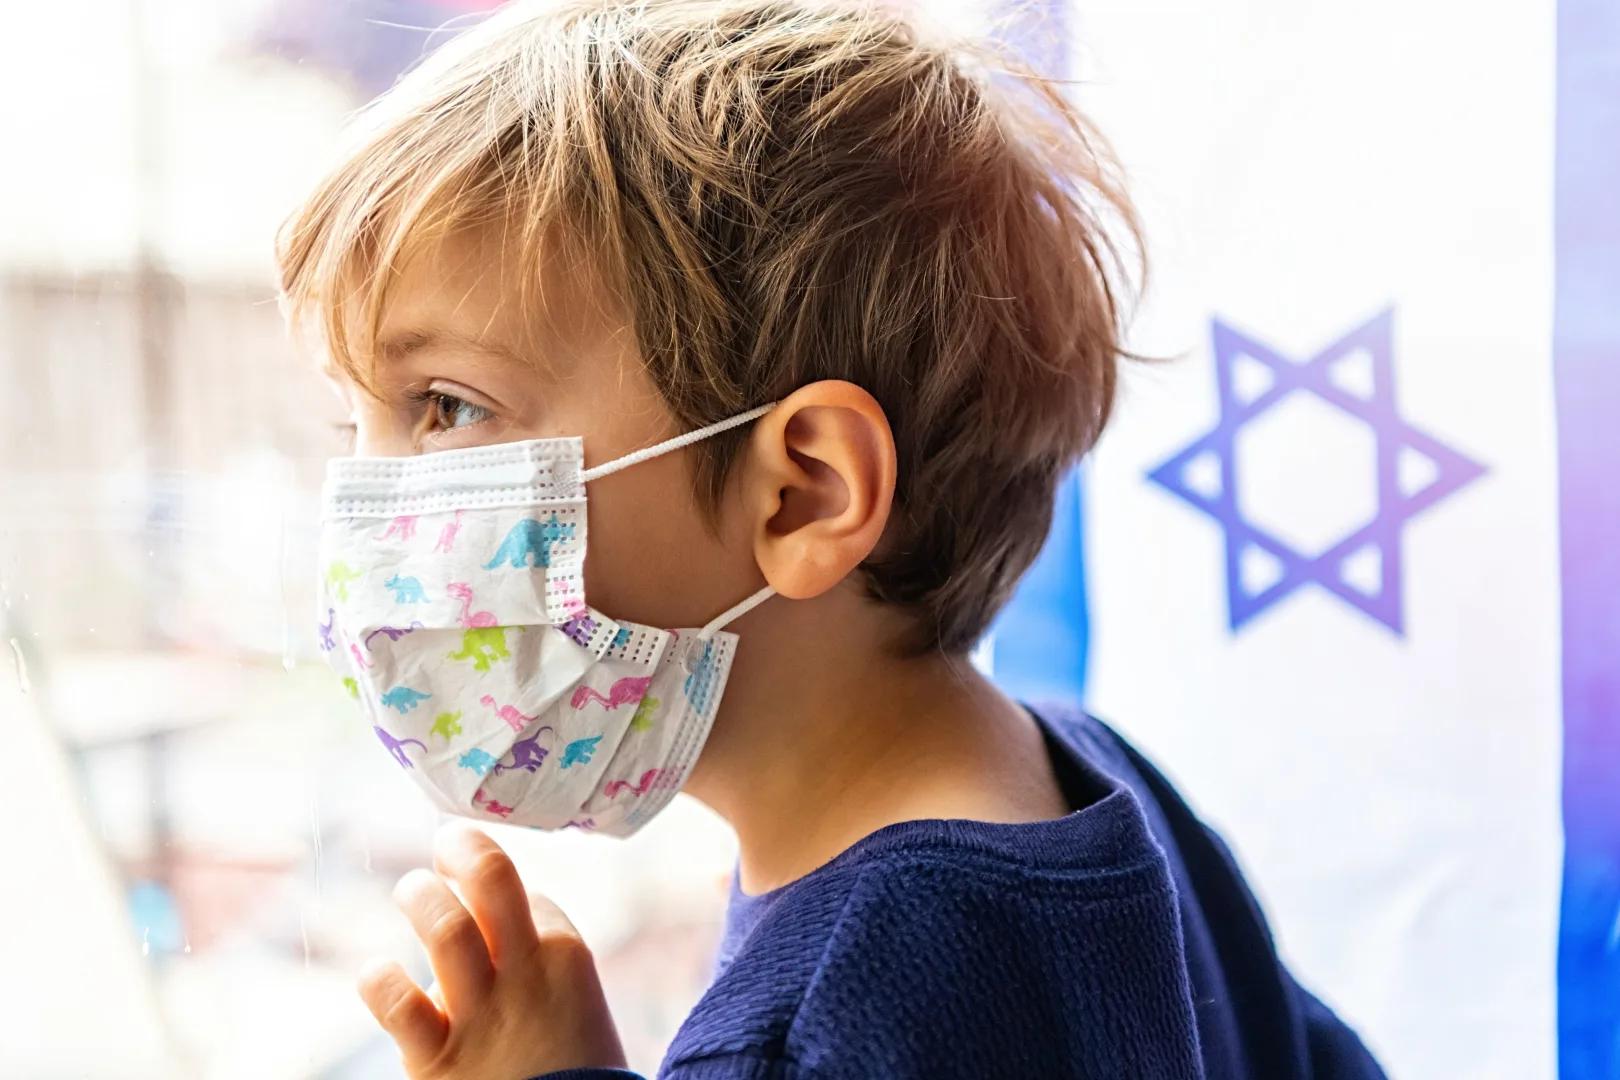 Israel Health Ministry fails to produce scientific evidence supporting masks when challenged